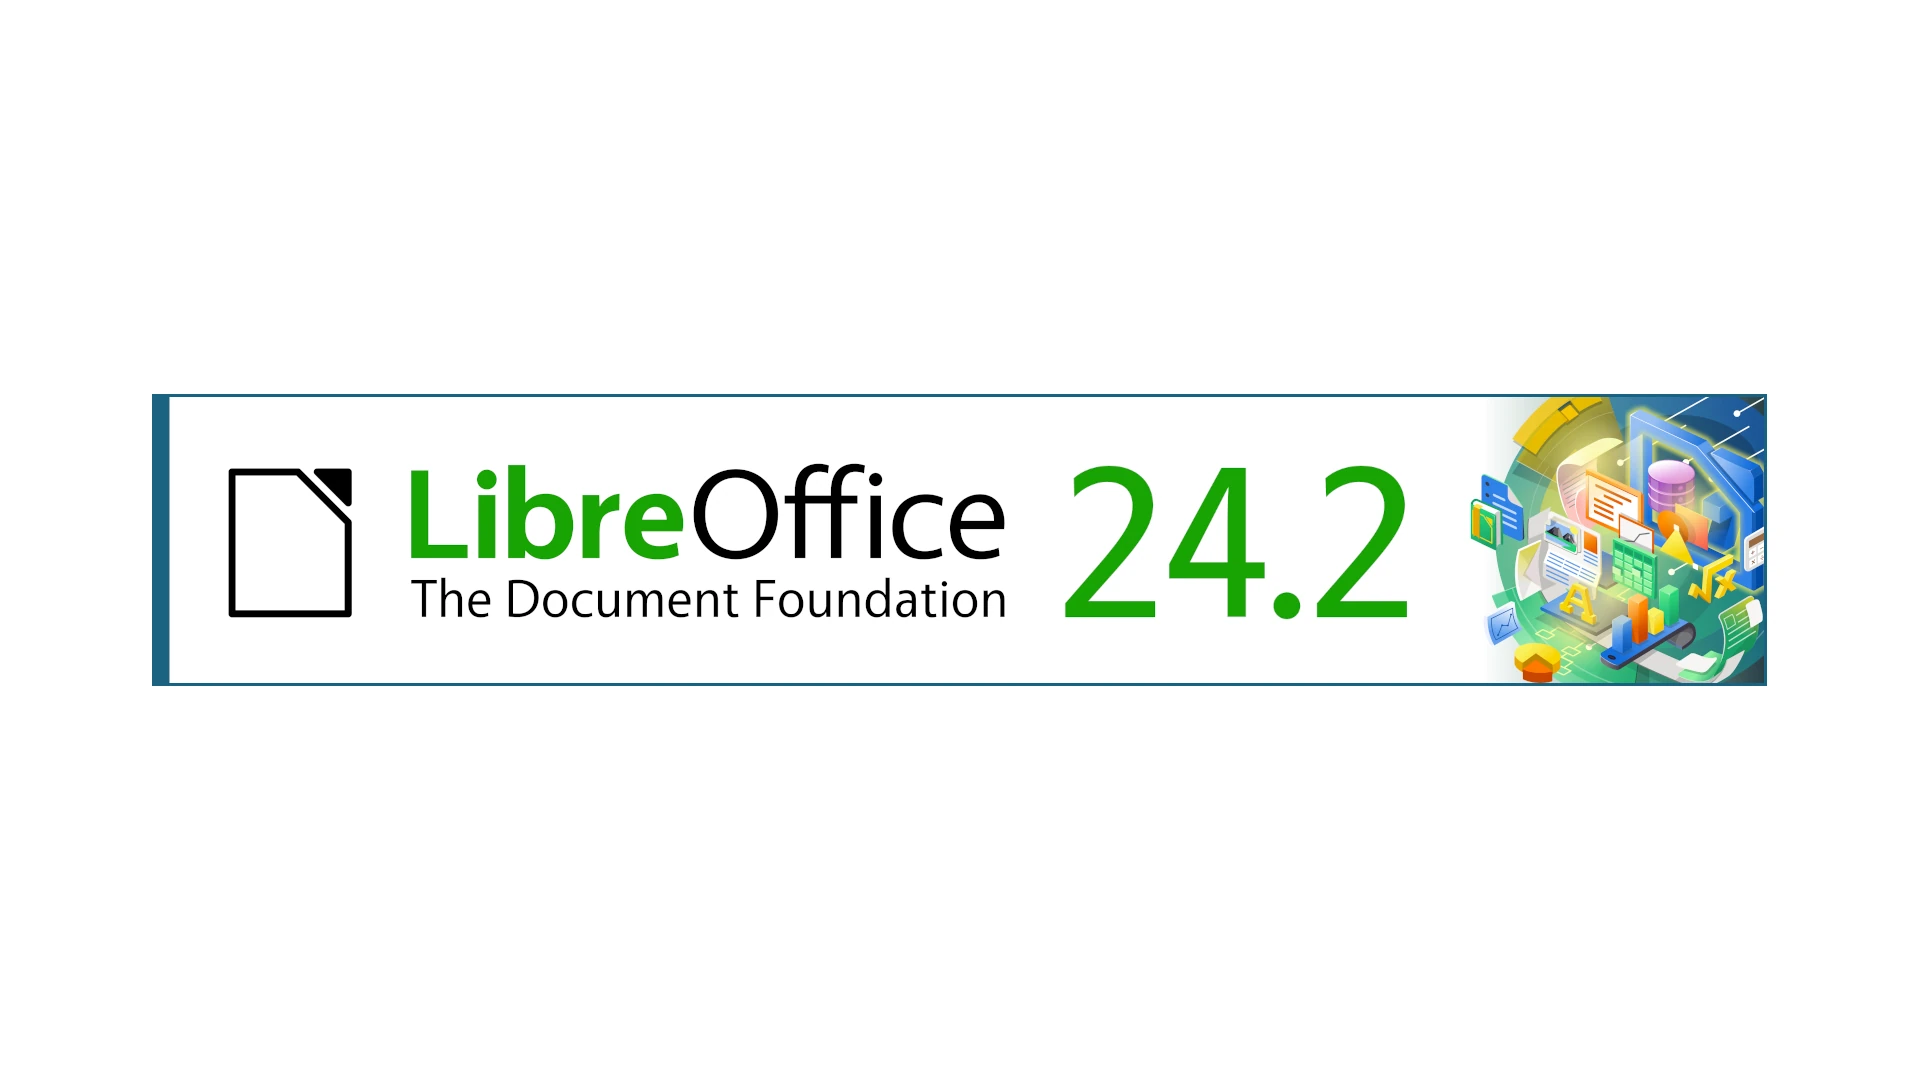 LibreOffice 24.2.1 Office Suite Is Out with More Than 100 Bug Fixes